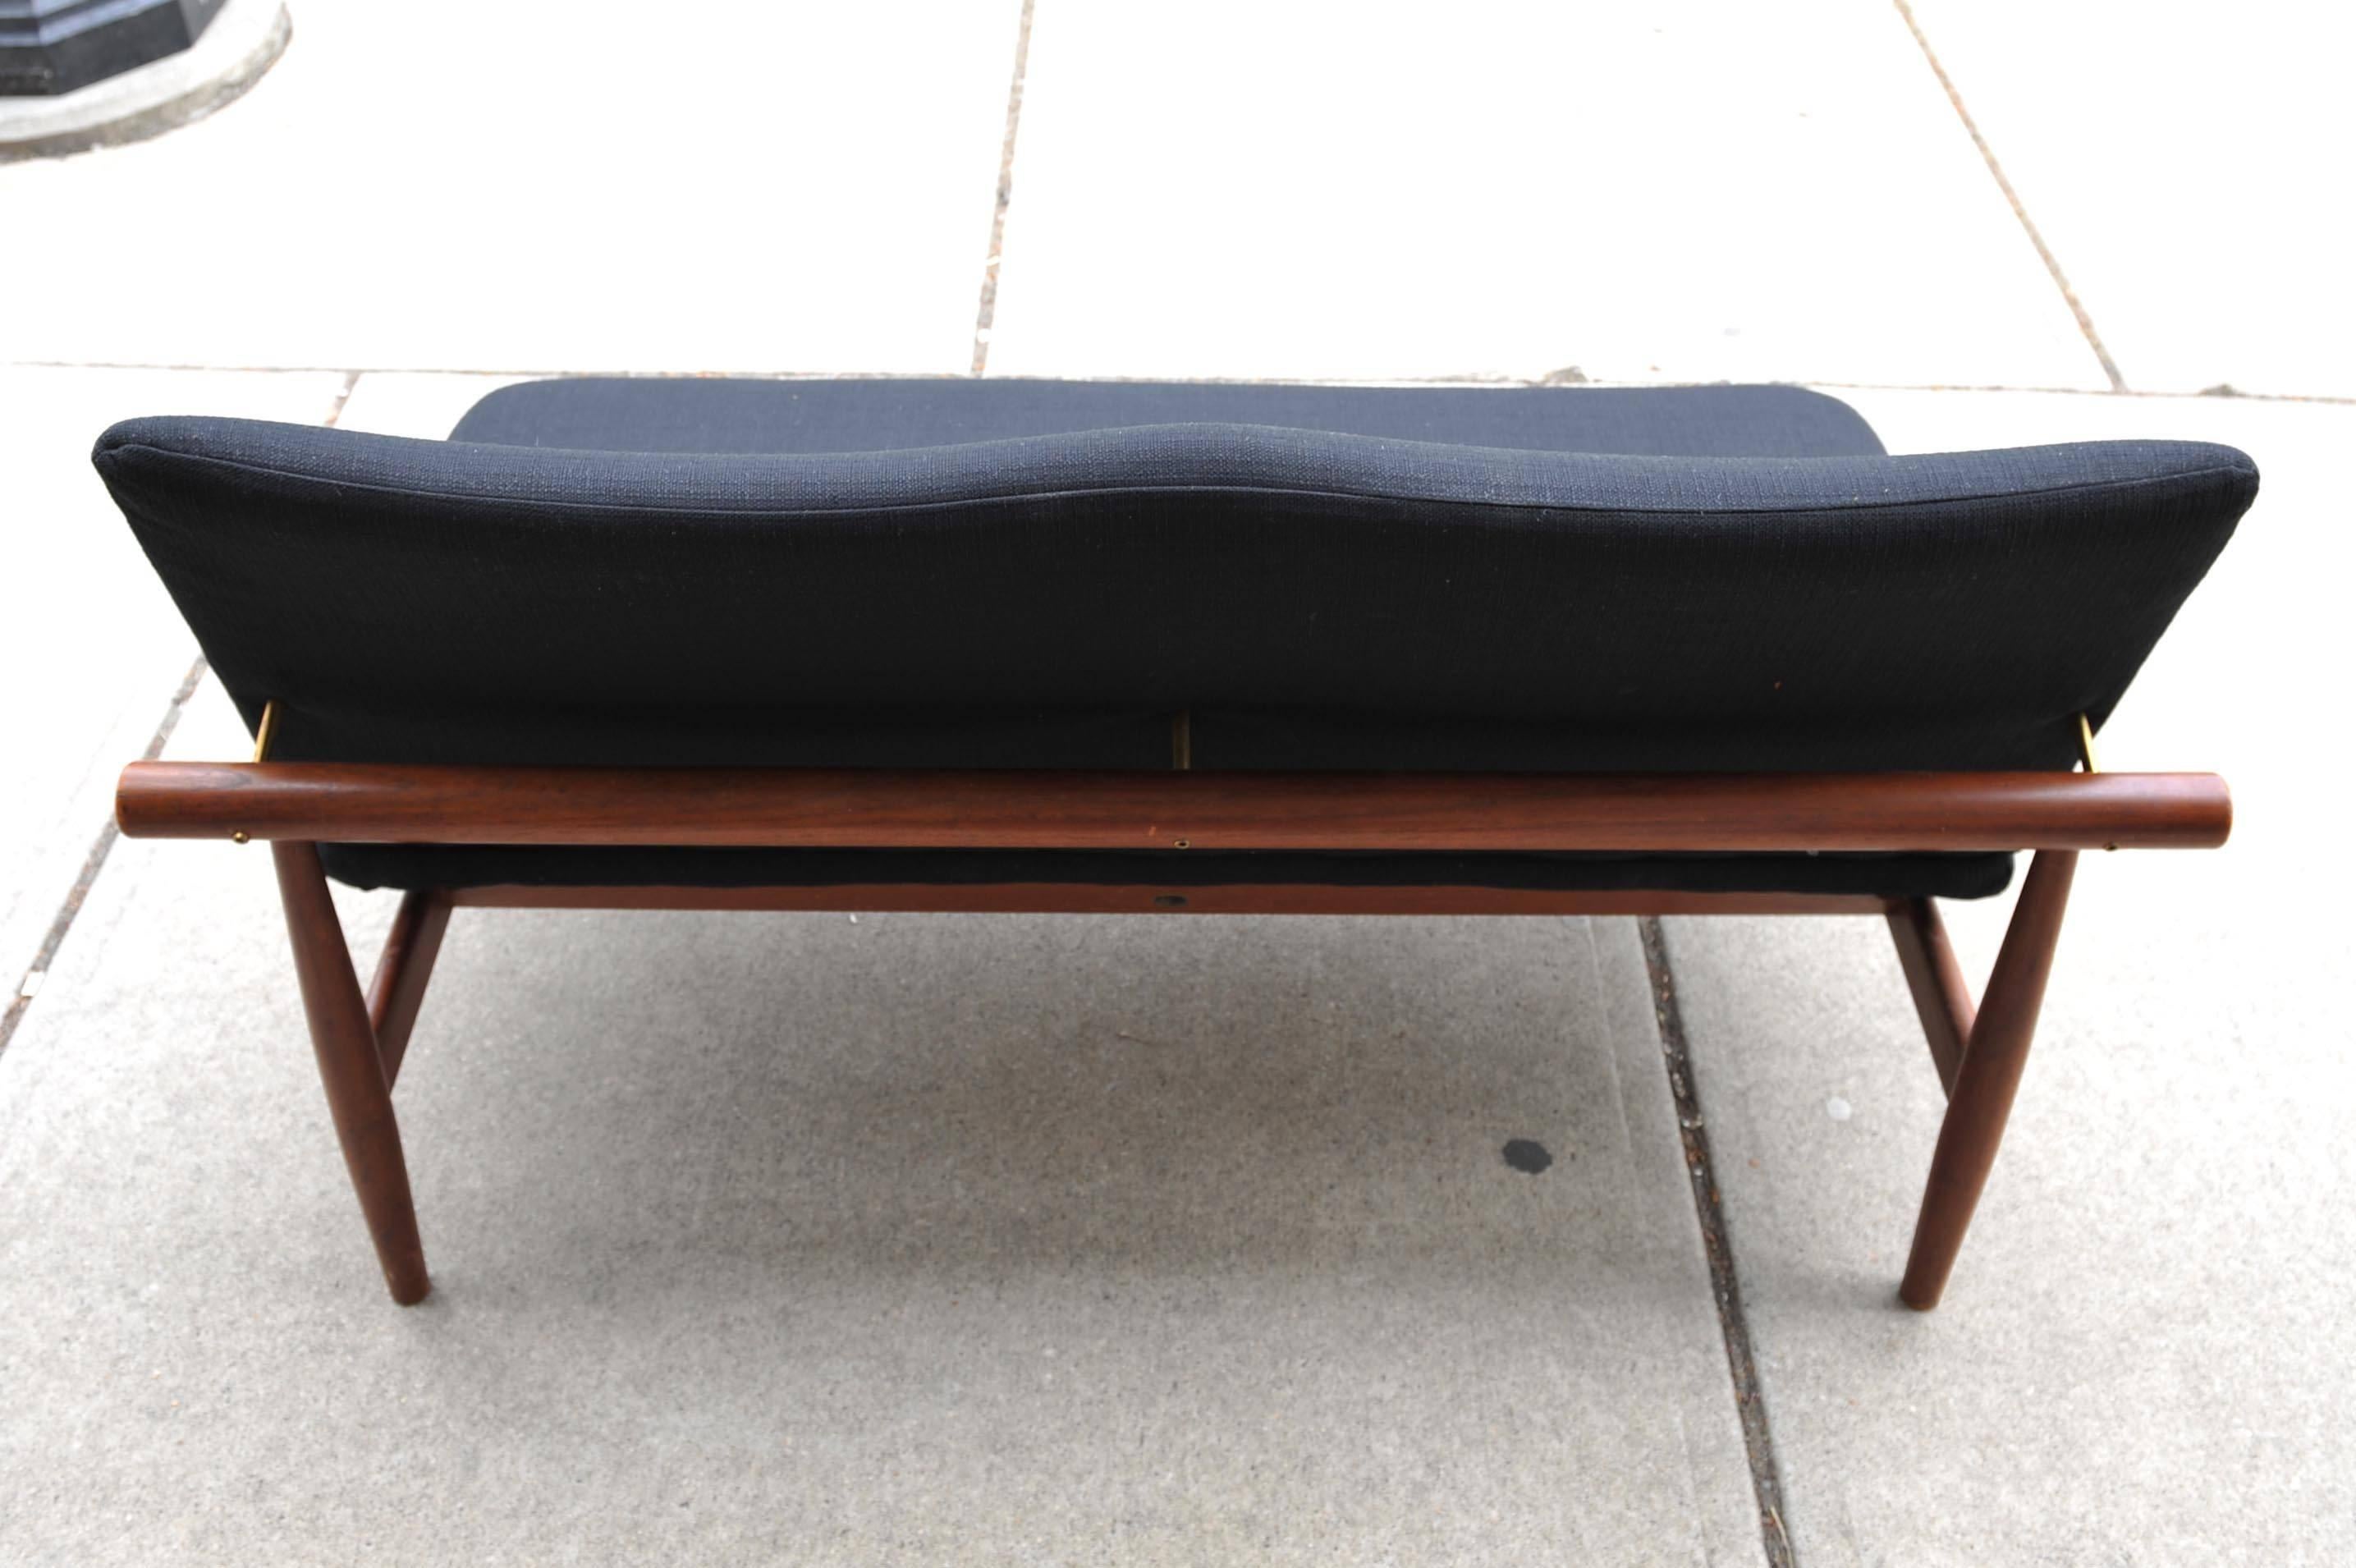 A rare Model 137 Japan sofa designed by Finn Juhl and manufactured by France & Son. The design of this sofa was inspired by Miyajima shrine off the coast of Hiroshima. New tweed upholstery over teak frame. Marked with original label.